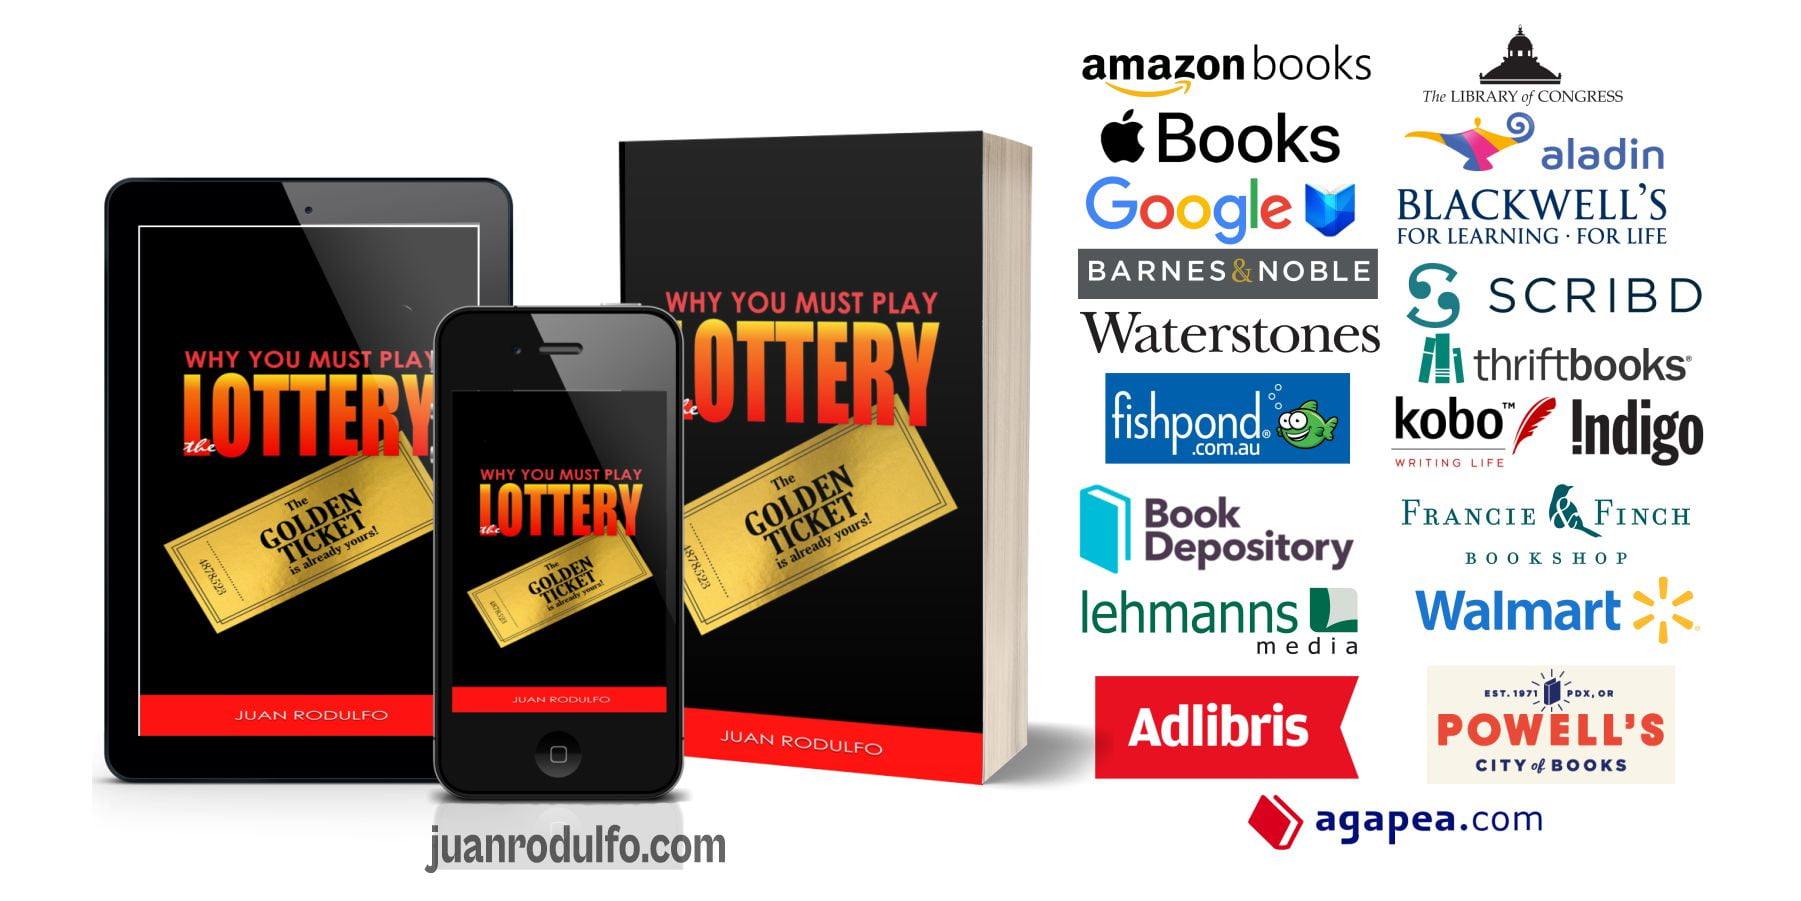 Why you must play the Lottery by Juan Rodulfo